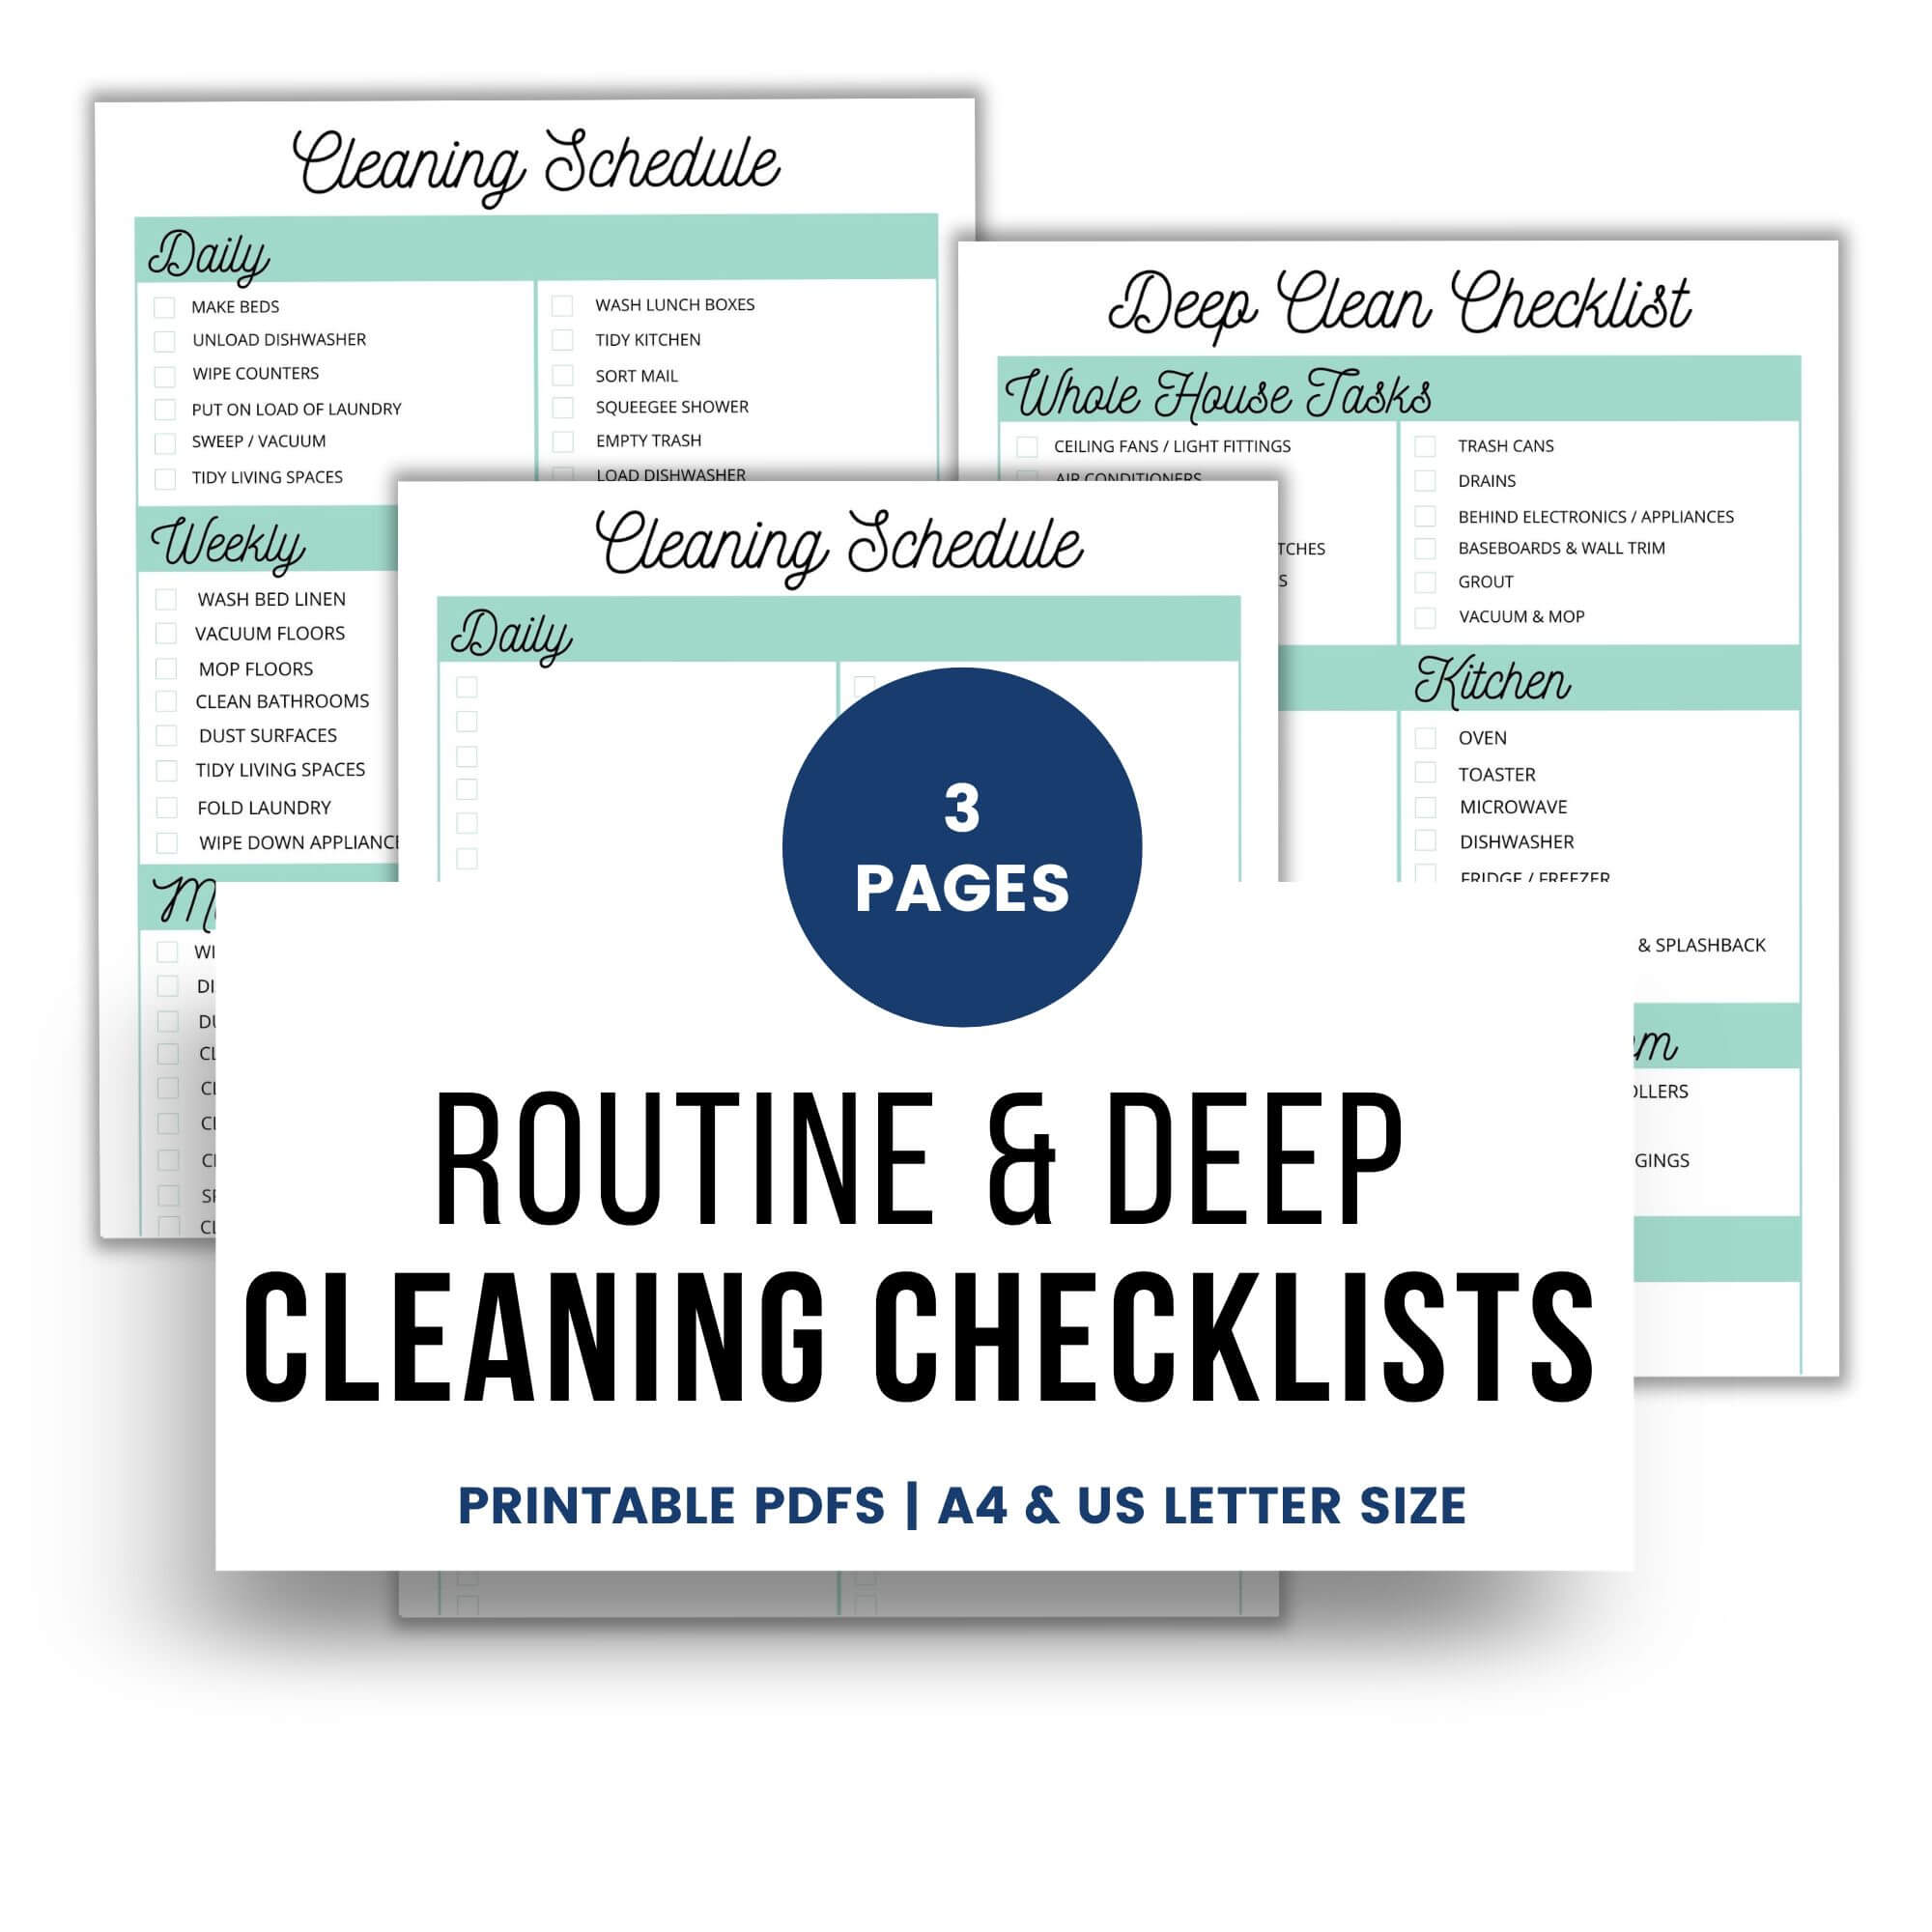 Routine and deep cleaning checklists